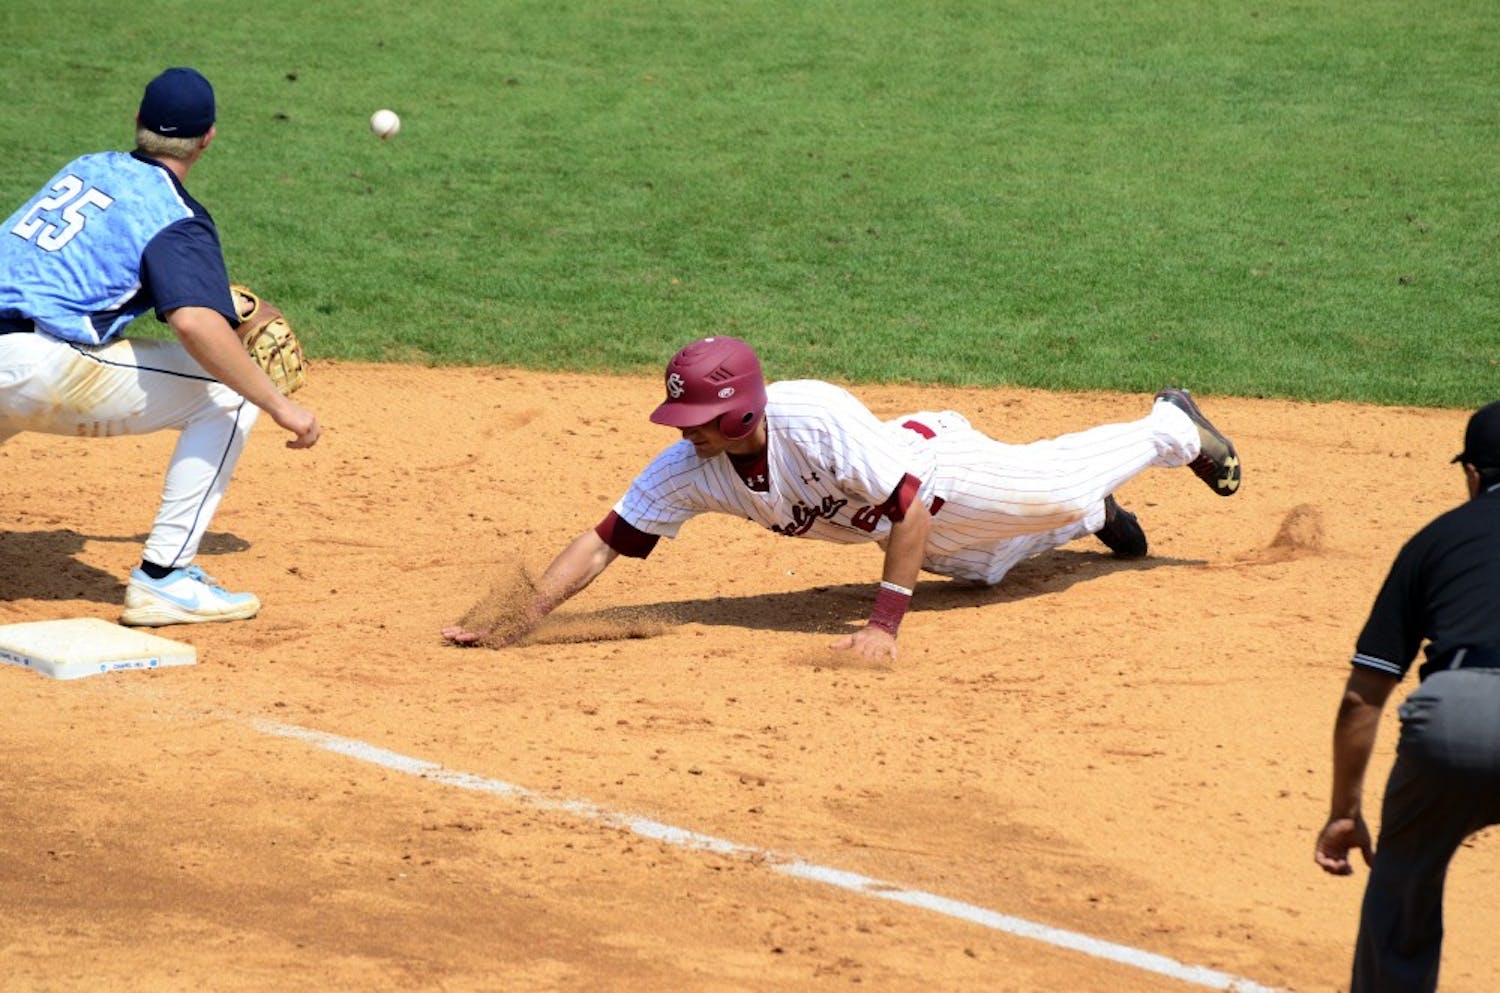 Gamecocks outfielder Graham Saiko dives to first base to avoid an being tagged out.